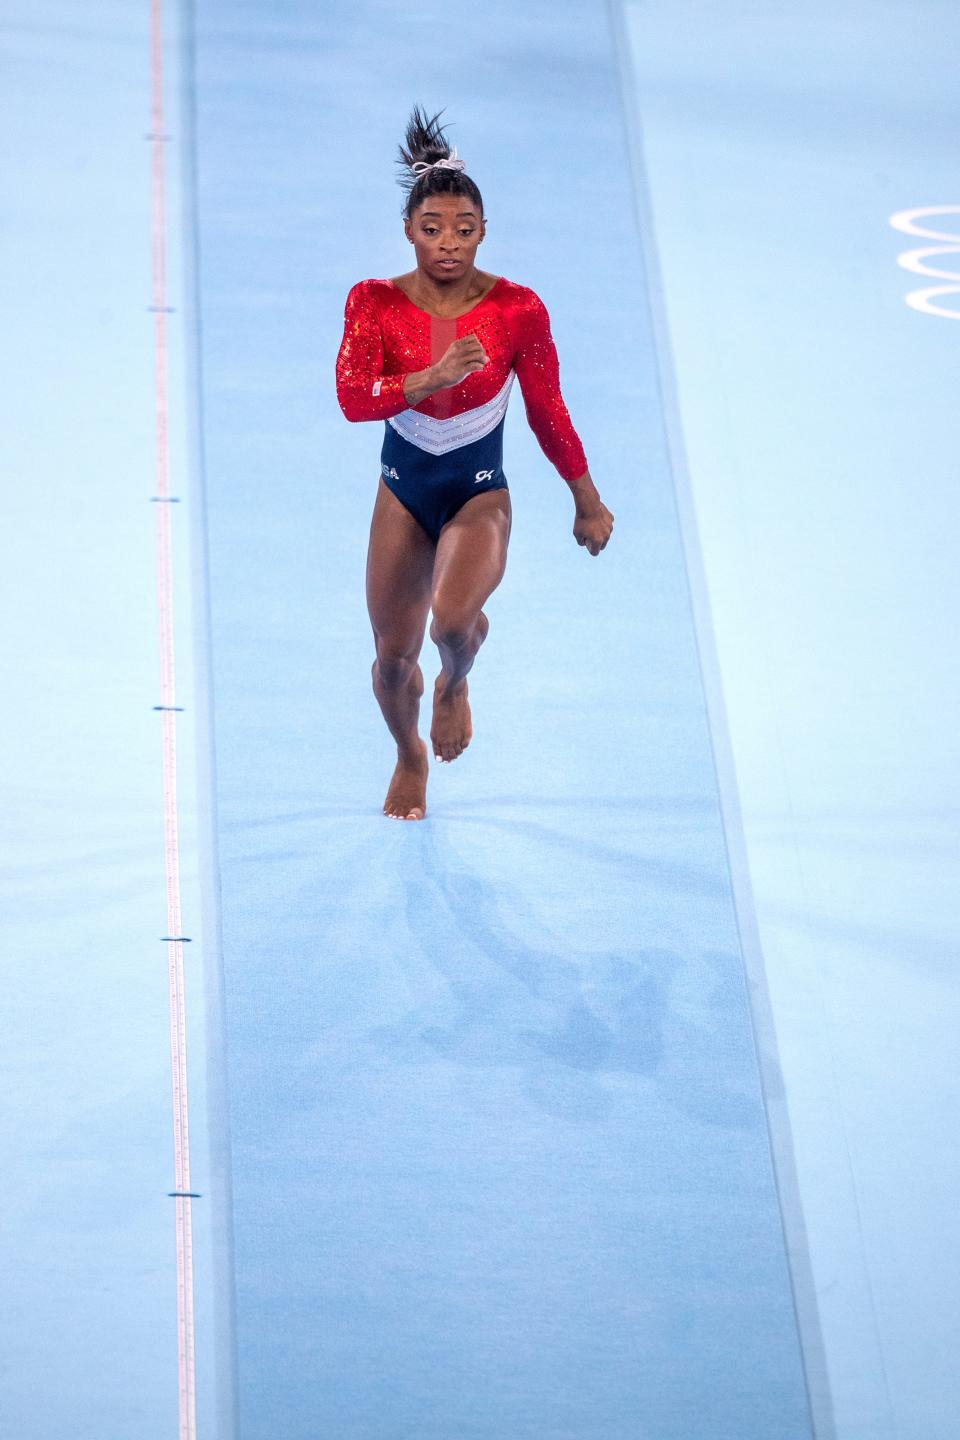 Biles is seen running toward the vault, which is not in view.